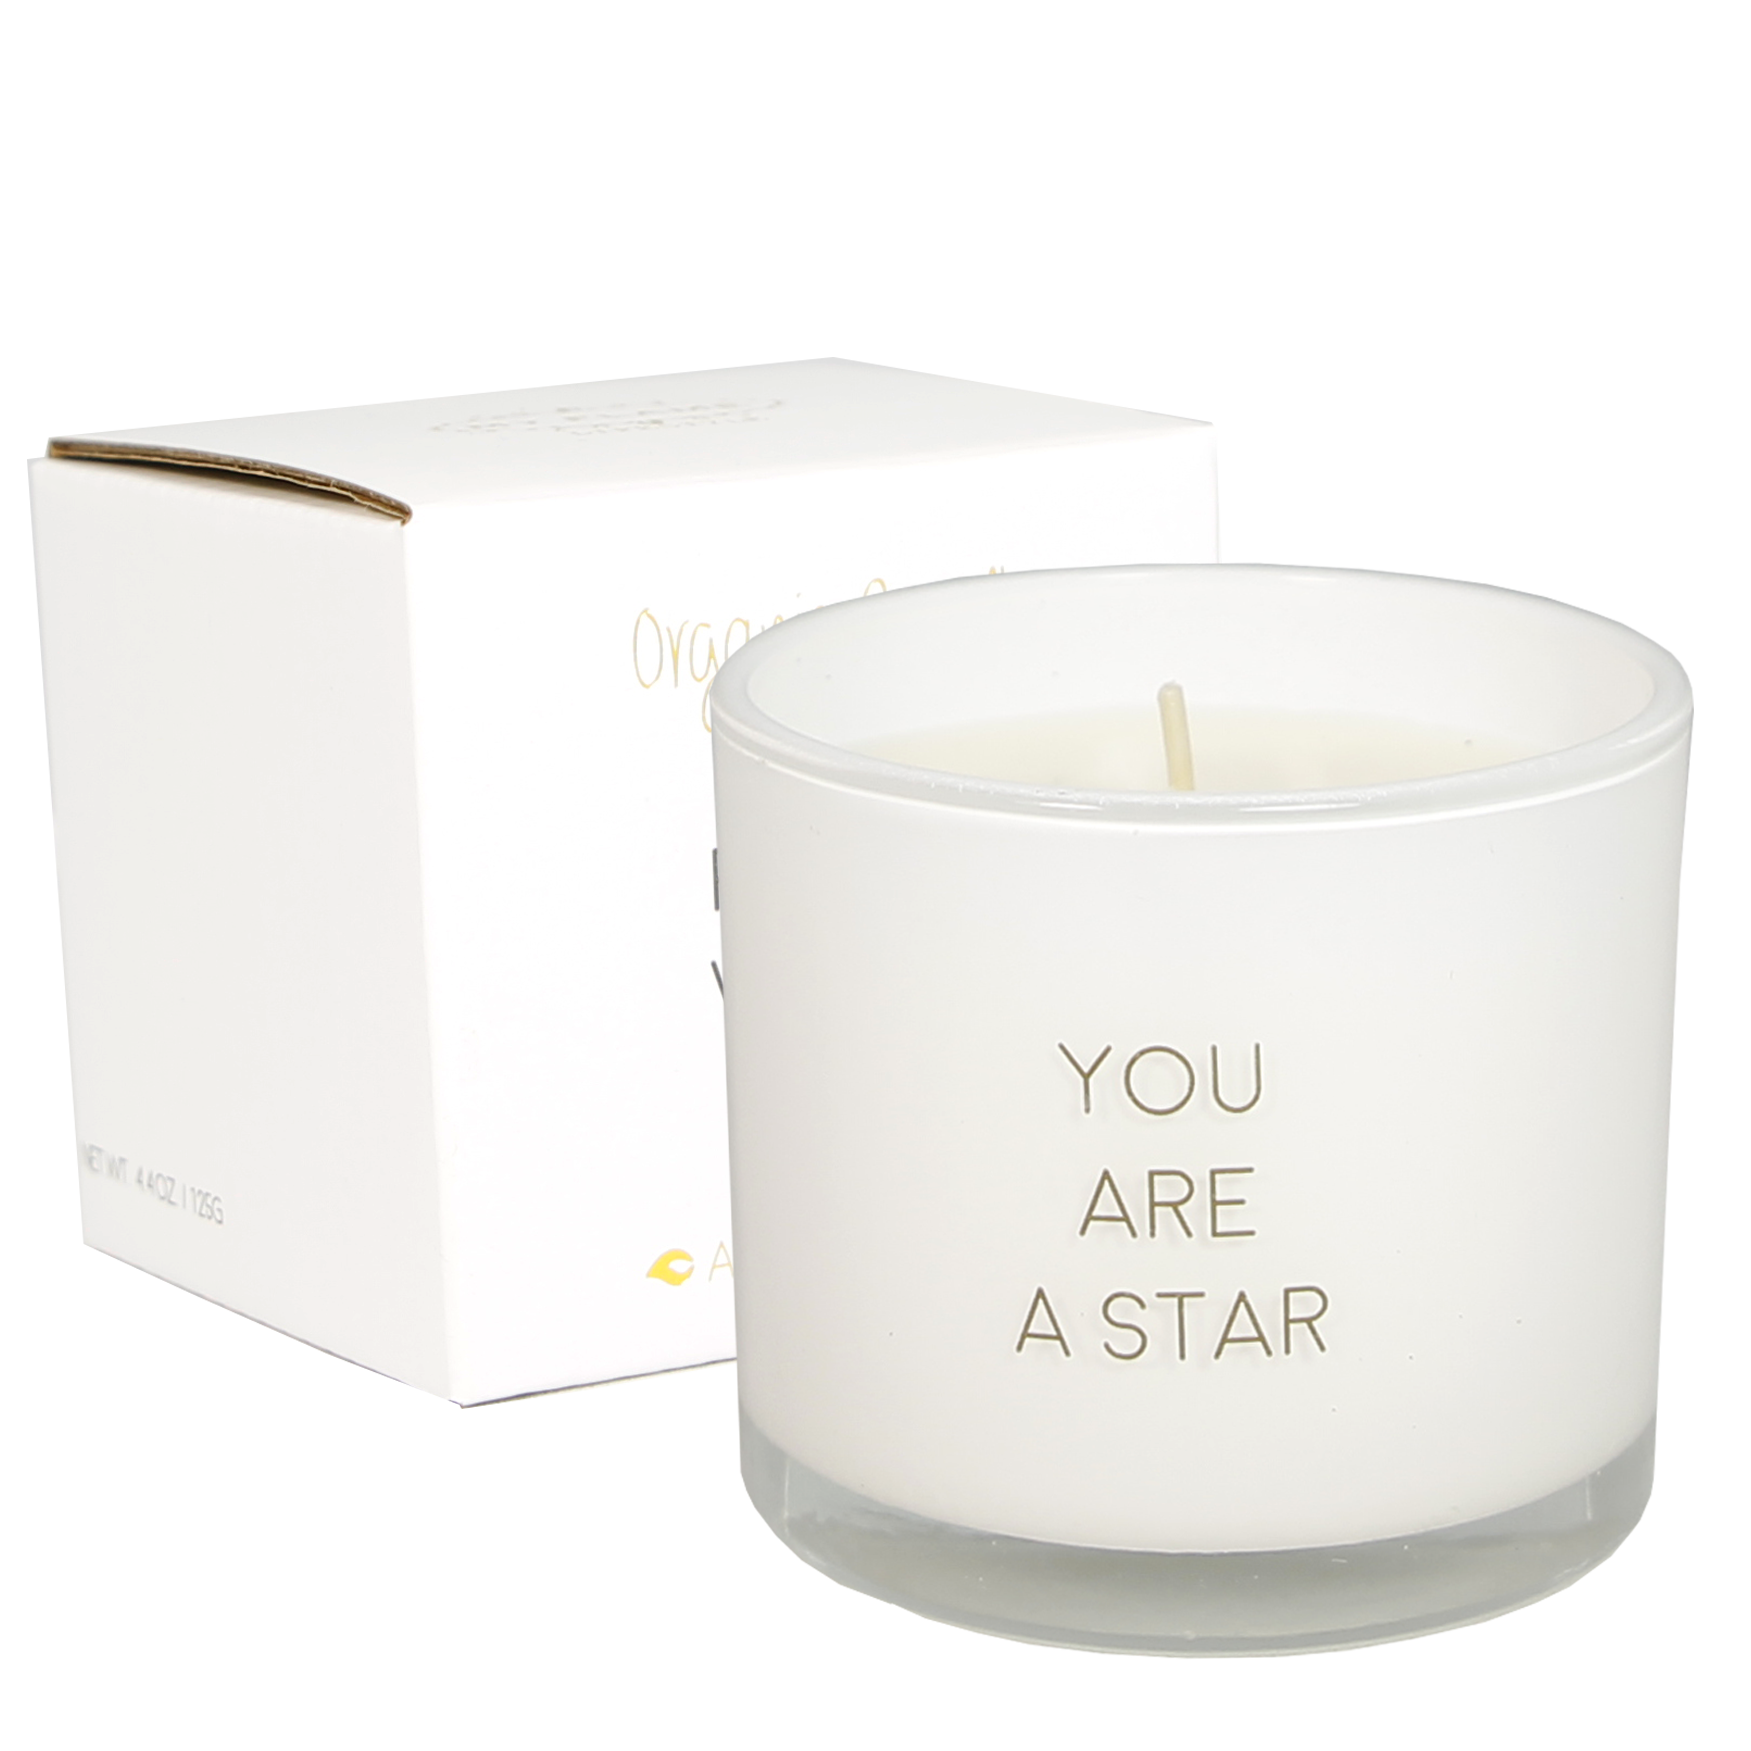 My Flame Lifestyle Candle with wish-bracelet - You are a star - Fresh Cotton